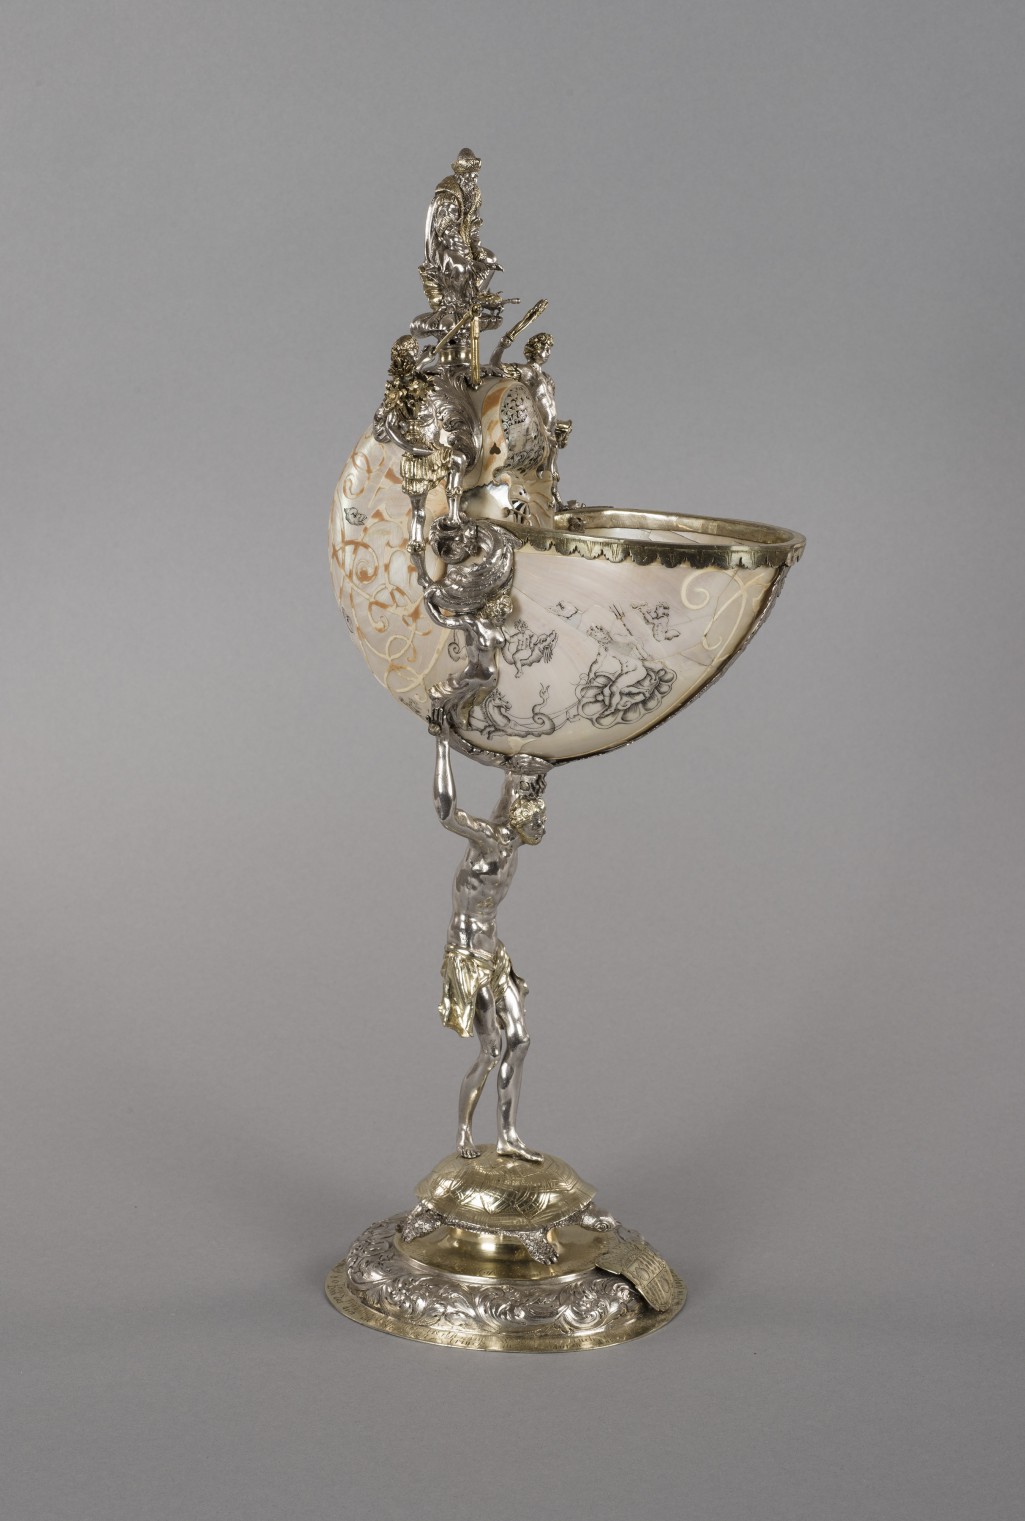 Nautilus goblet with figures of the four seasons, 1680, Vienna, mount by Christoff Neumayr (active Vienna 1668–83)